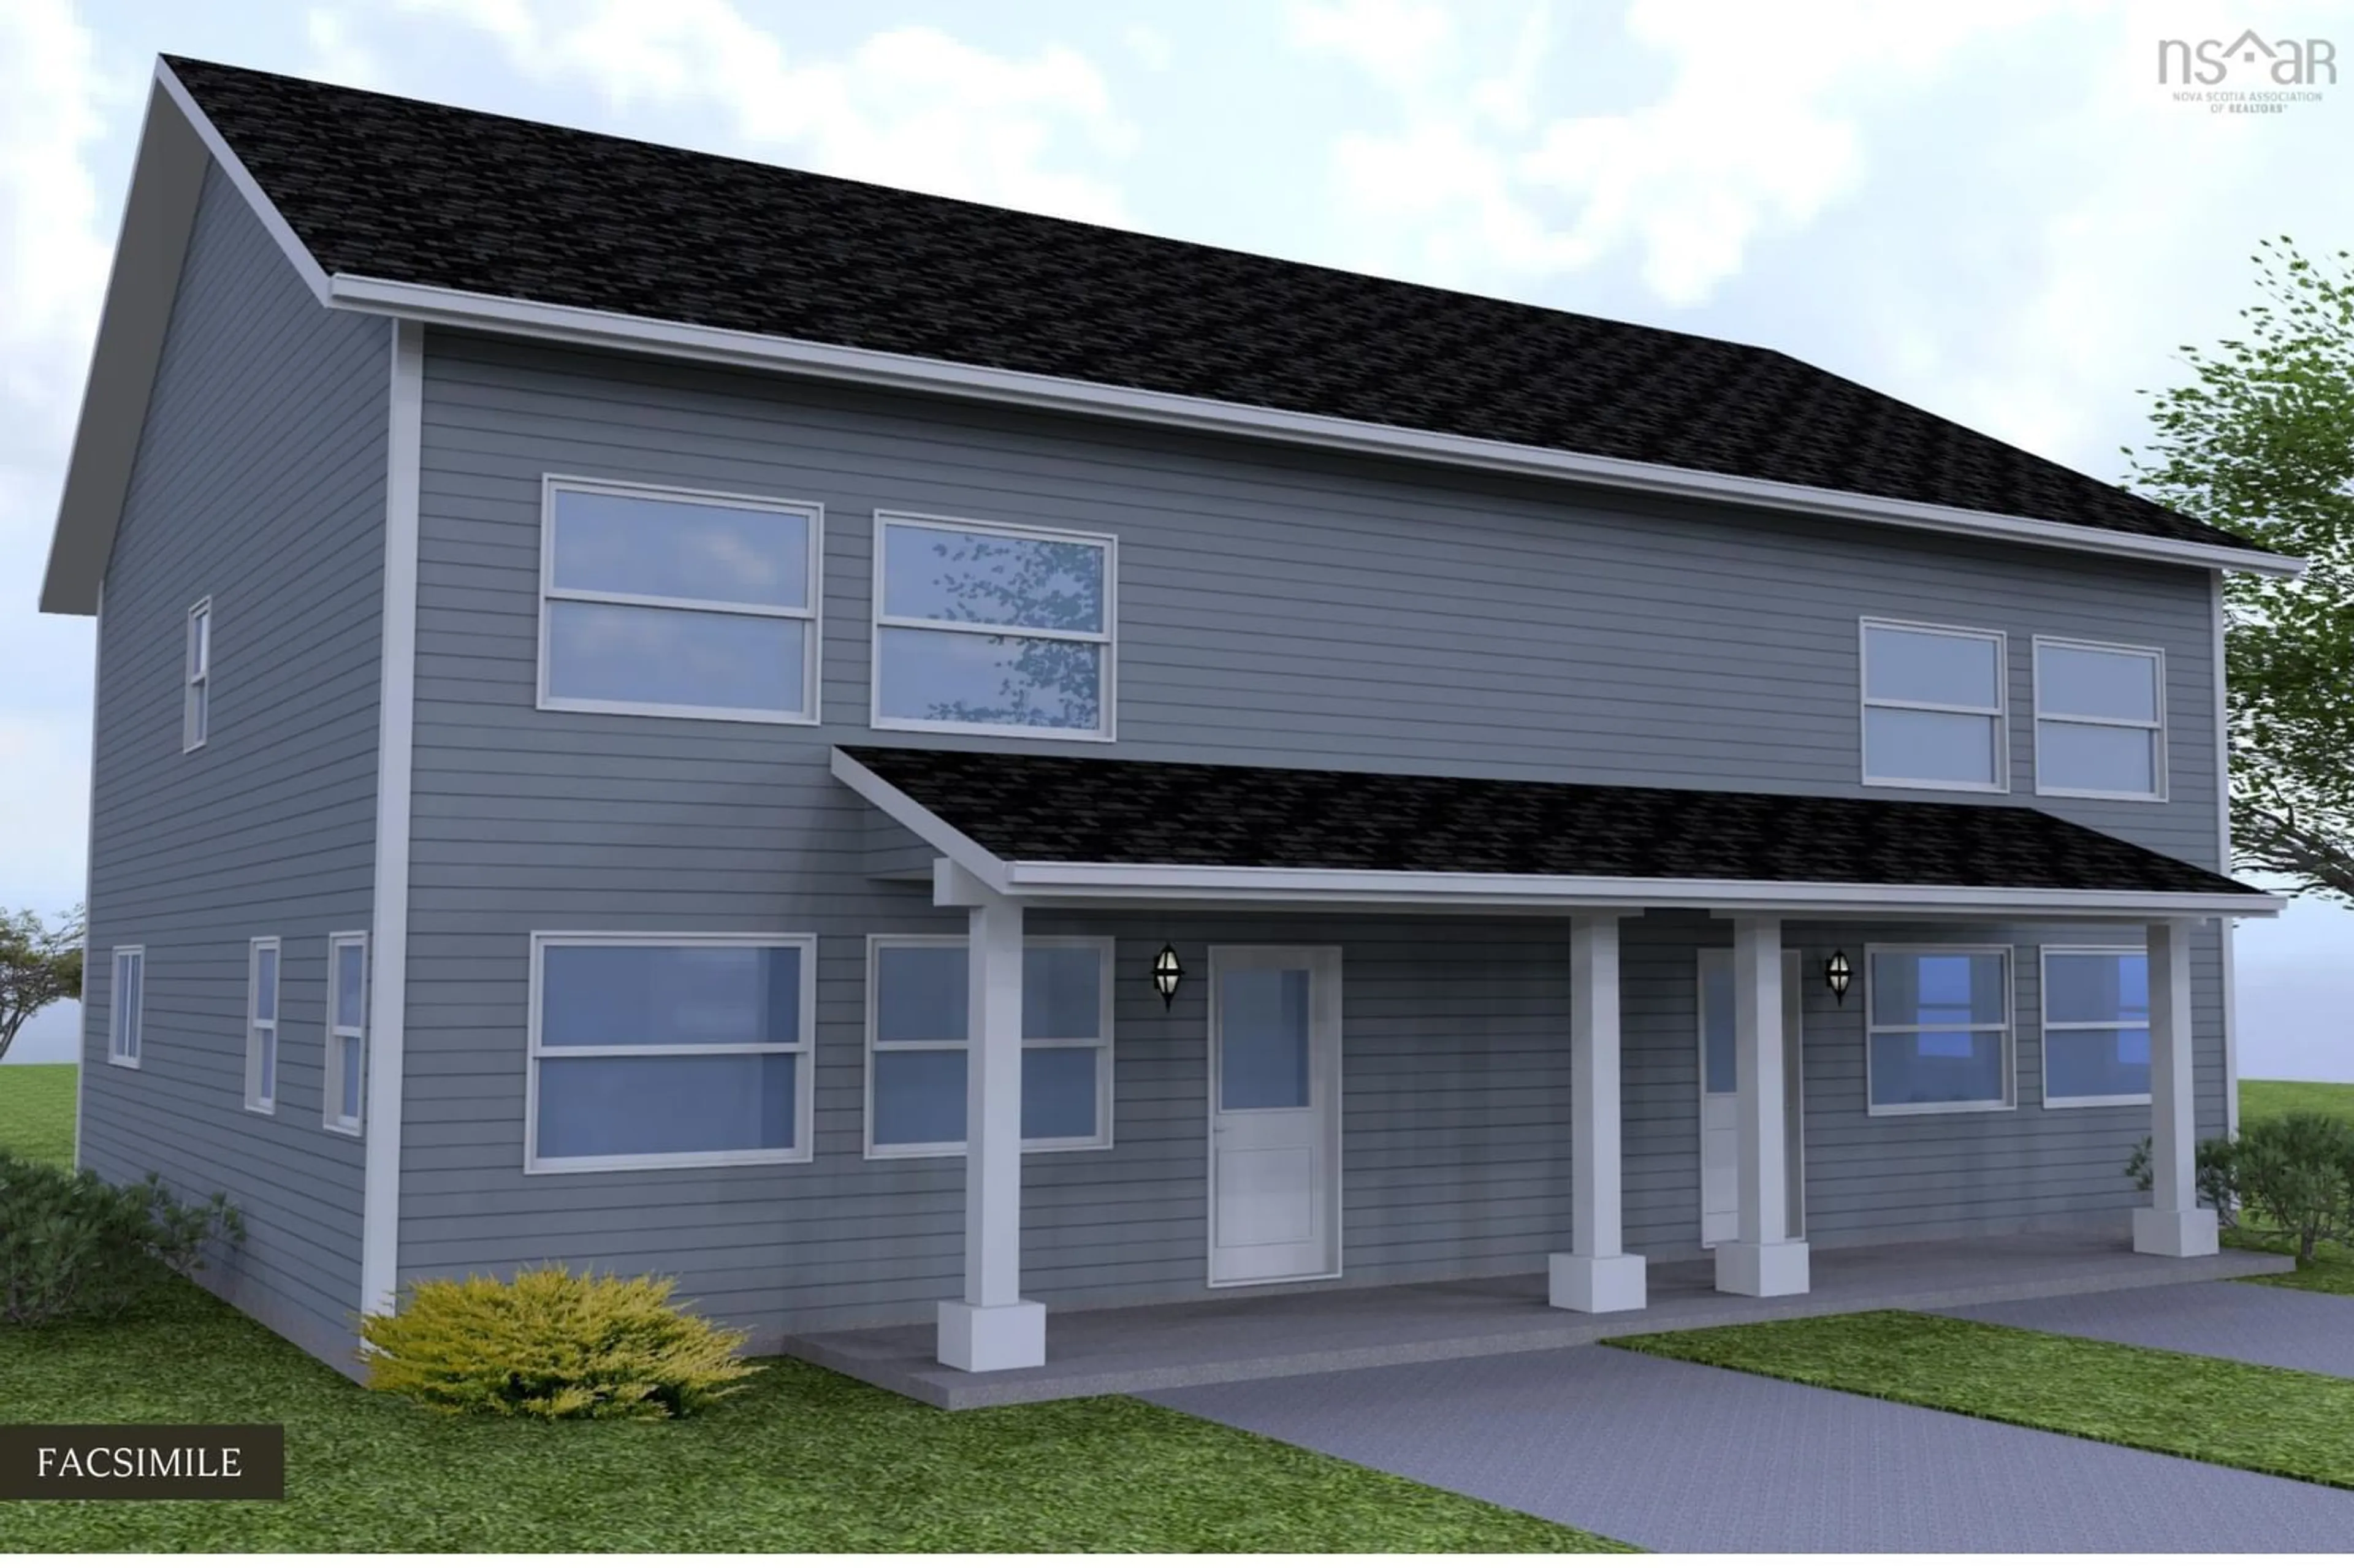 Outside view for Burgess Cres #Lot 213A, Windsor Nova Scotia B0N 2T0